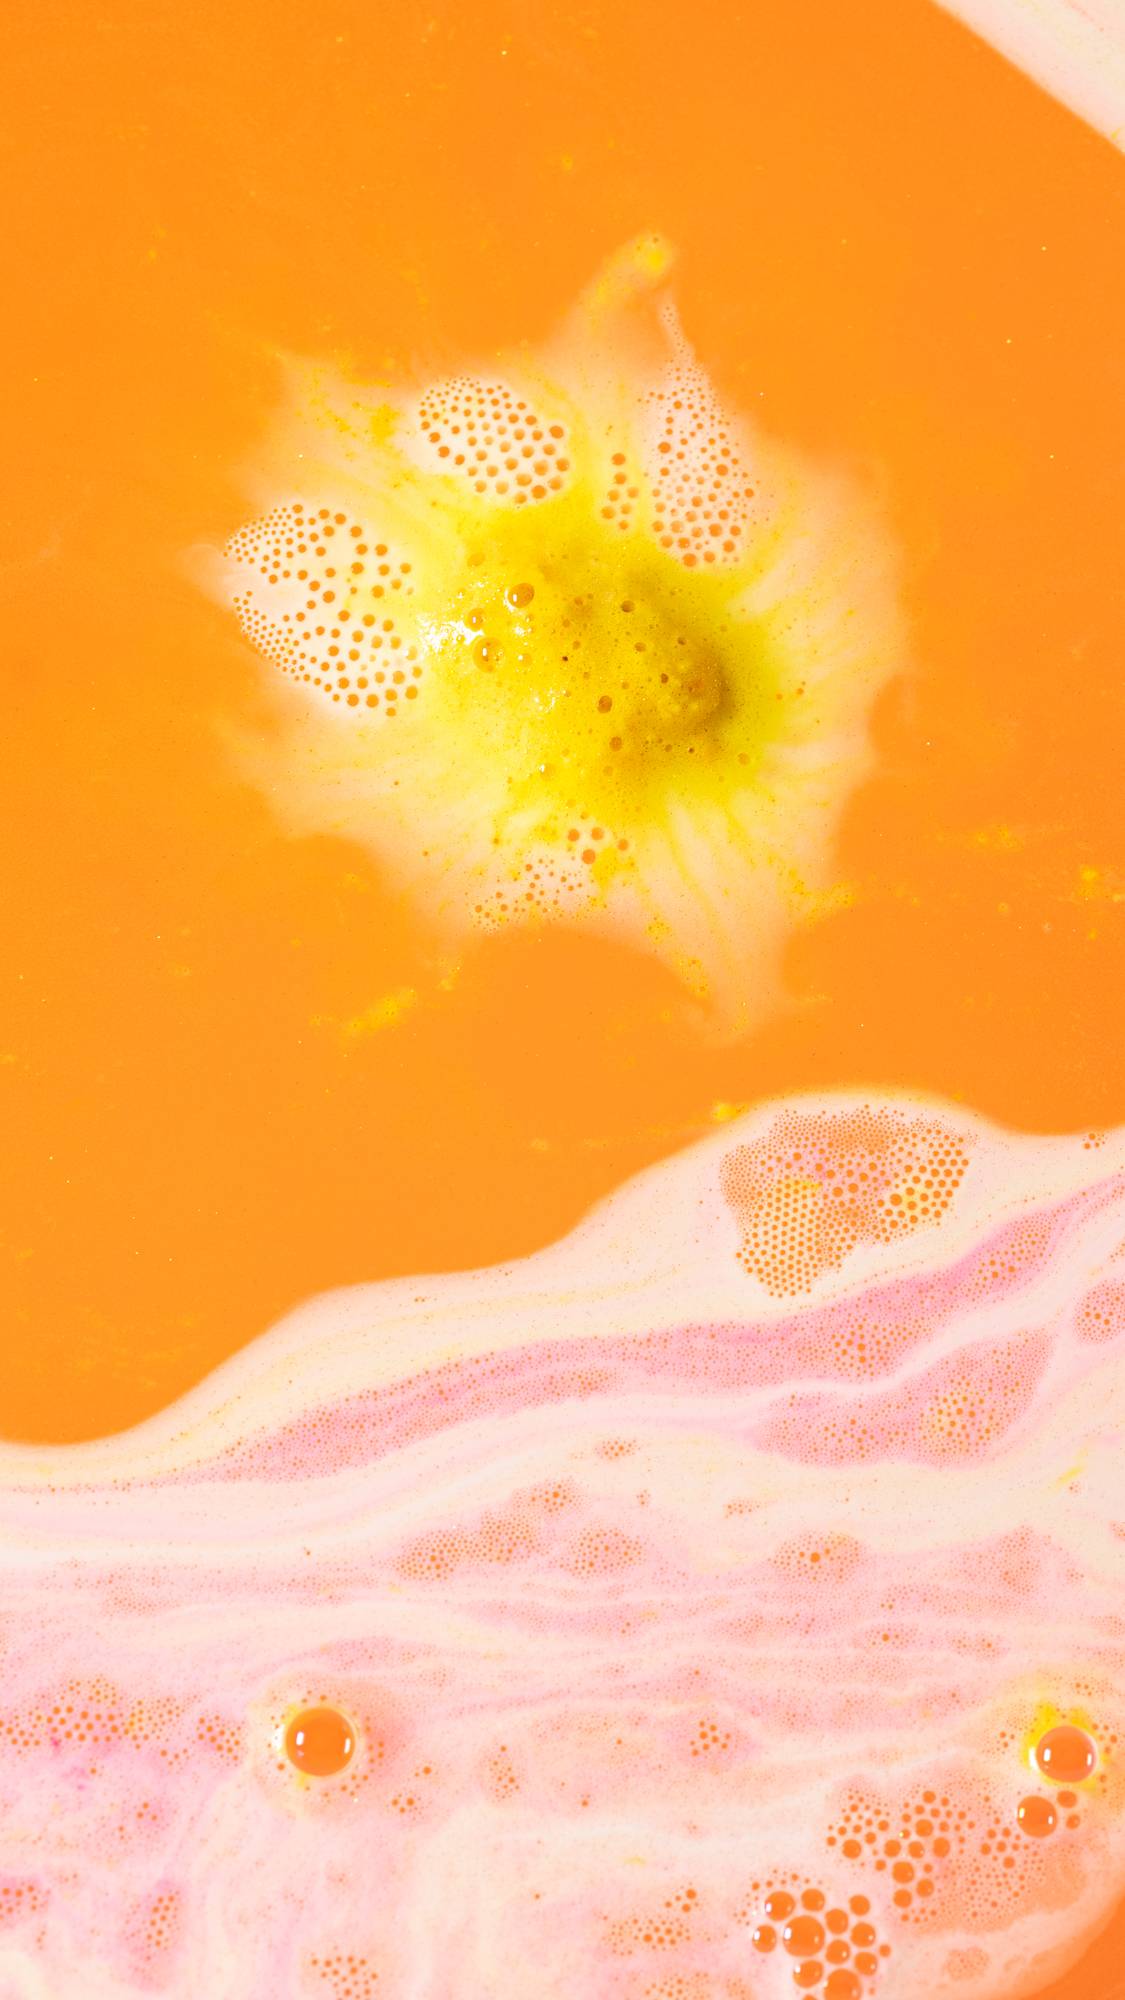 The Golden Egg bath bomb melt has almost dissolved leaving a sea of orange water with a small flash of yellow foam remaining. 